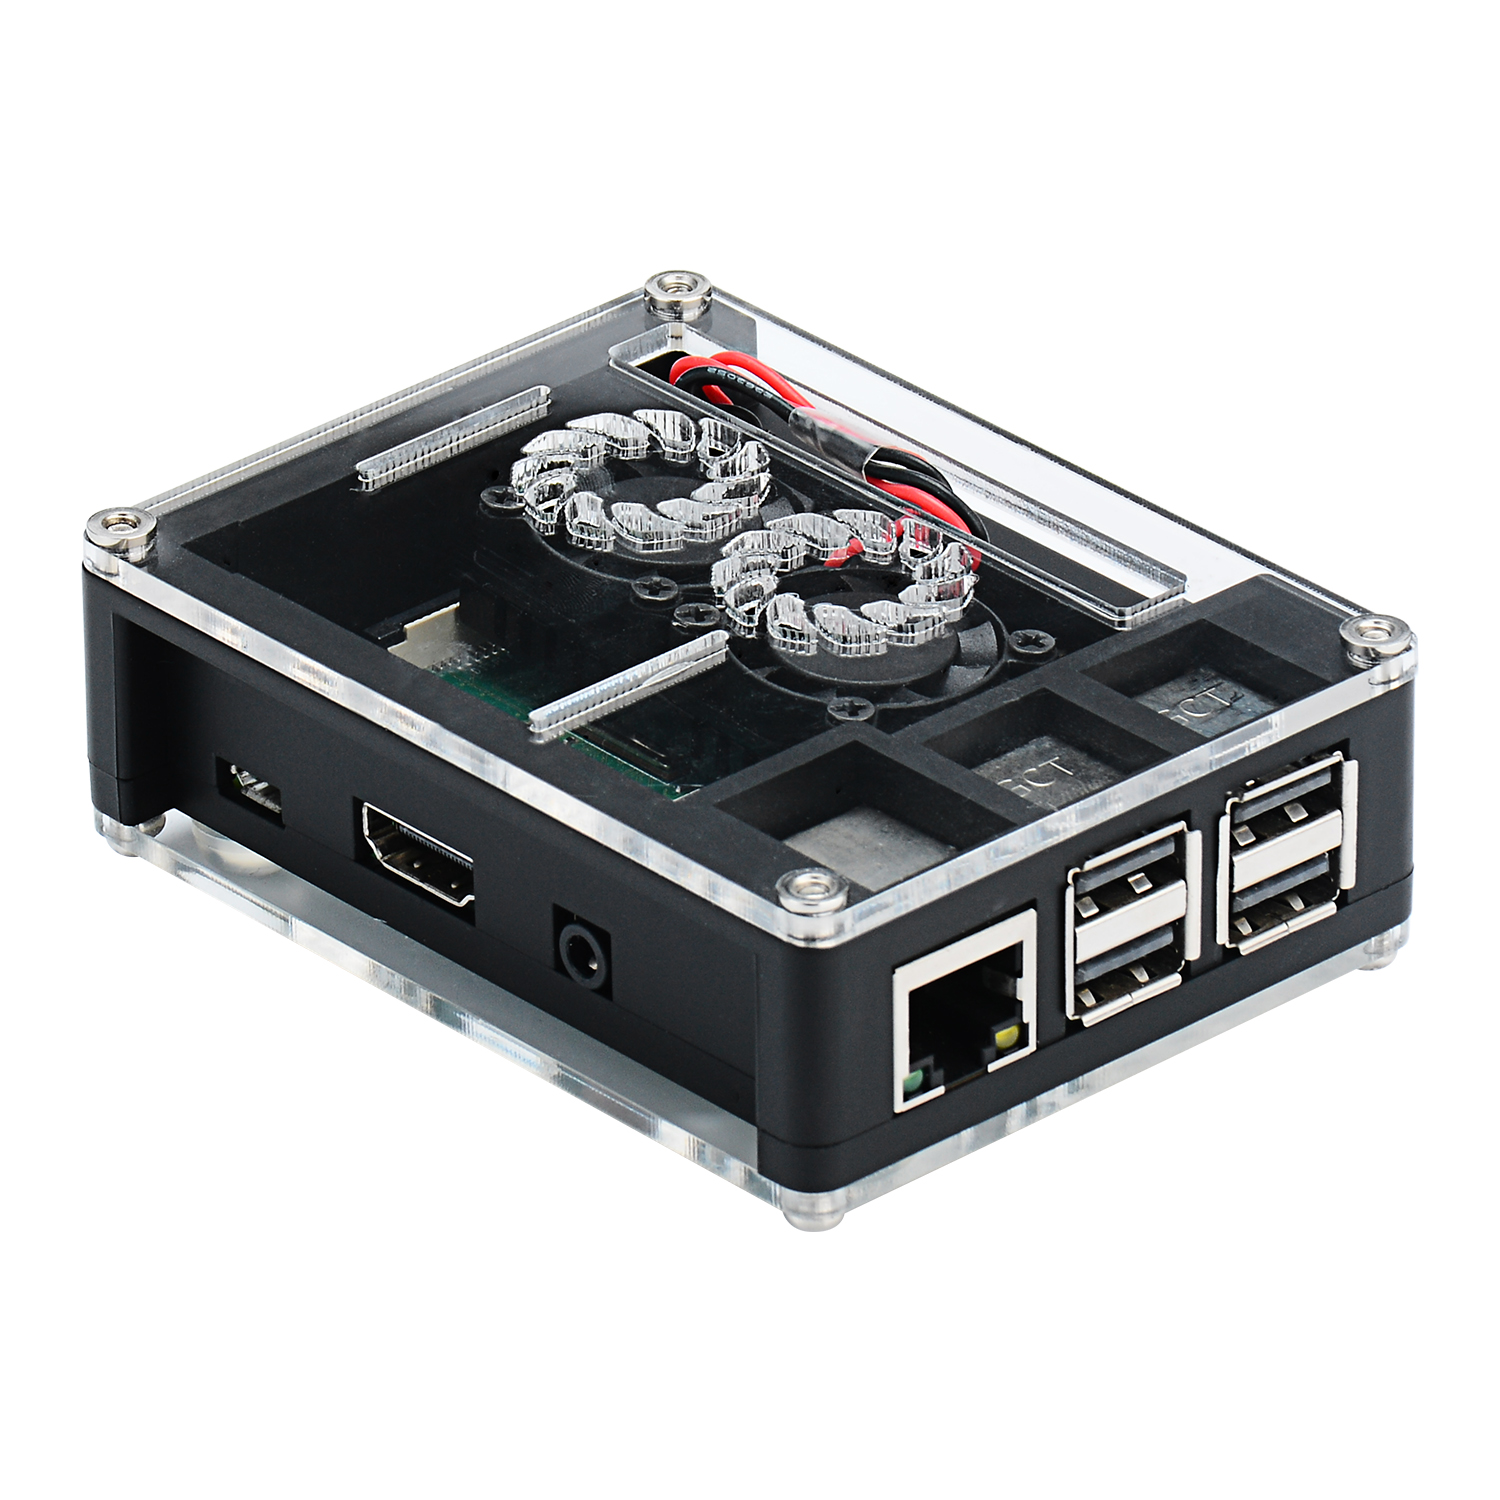 Black-Acrylic-Case-Support-Dual-Cooling-Fans-For-Raspberry-Pi-3B-Board-1411938-5